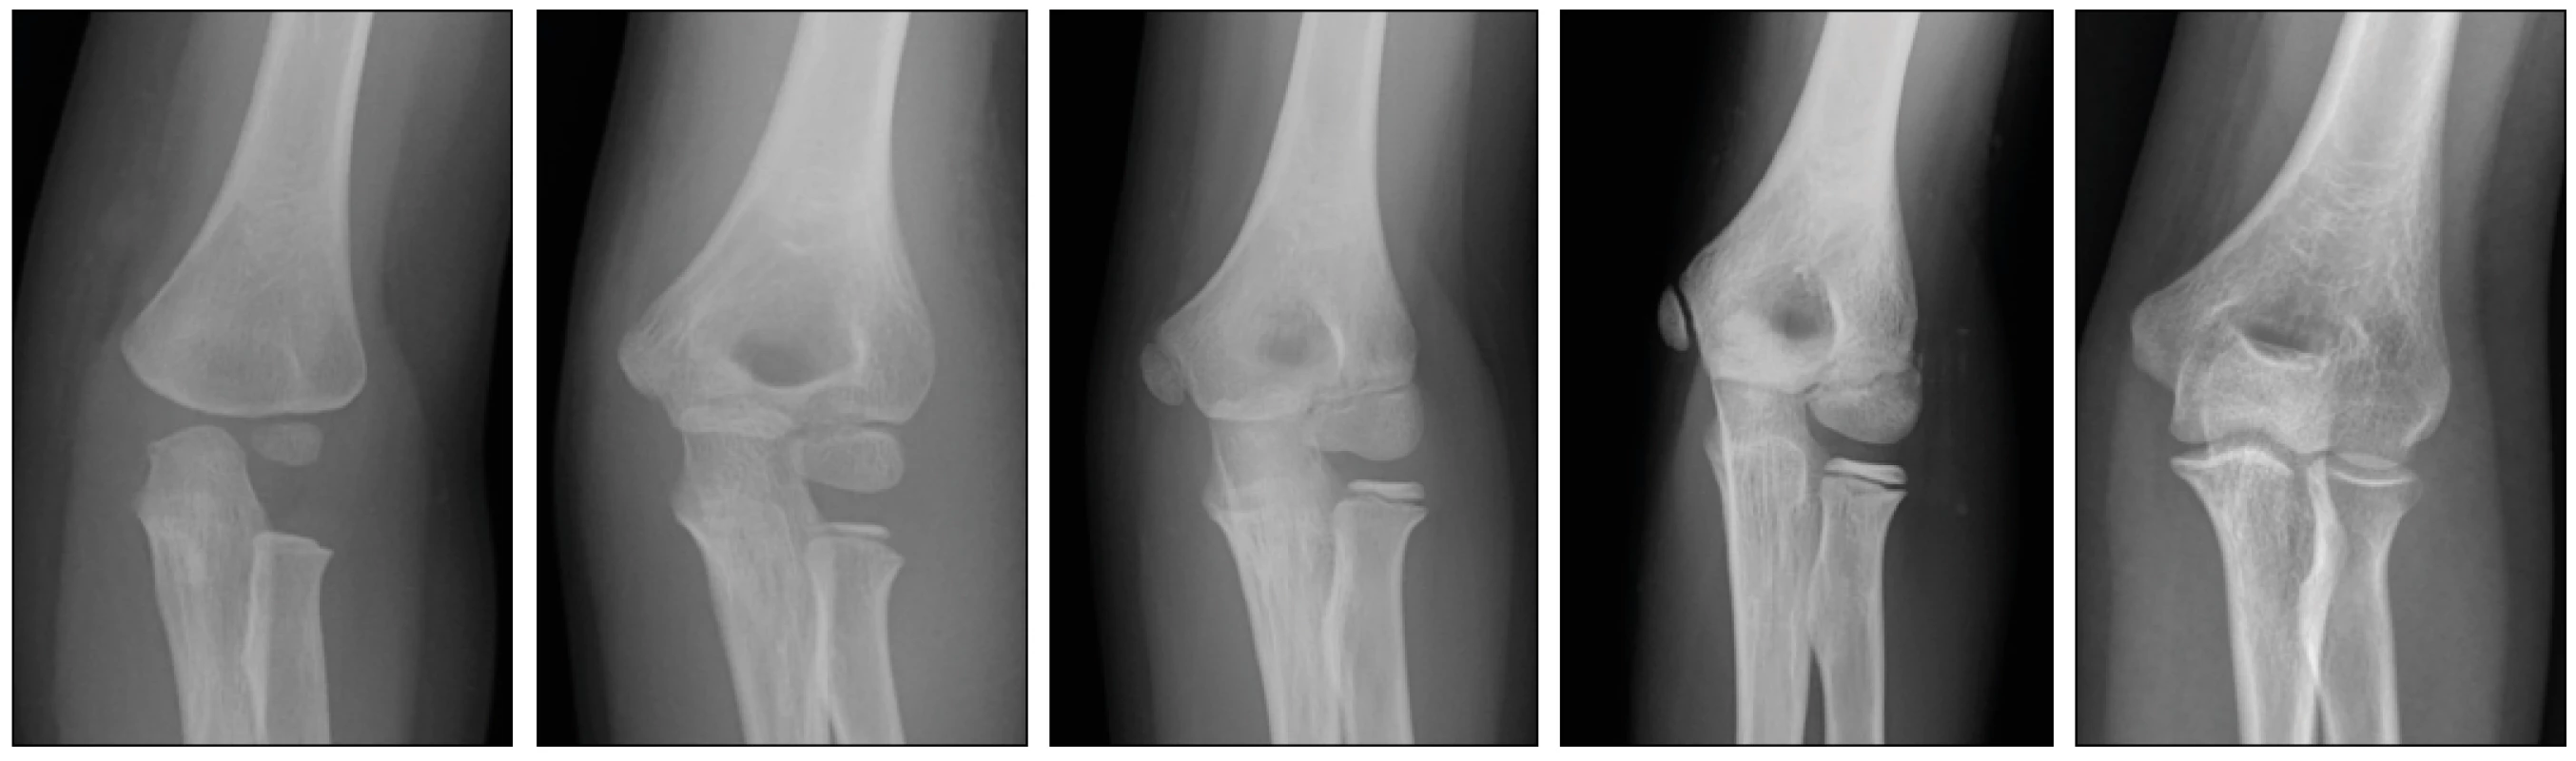 a-e: Gradual development of ossification of the elbow joint. a - 3 years of age, b - 6 years of age, c - 8 years of age, d - 11 years of age, e - 14 years of age